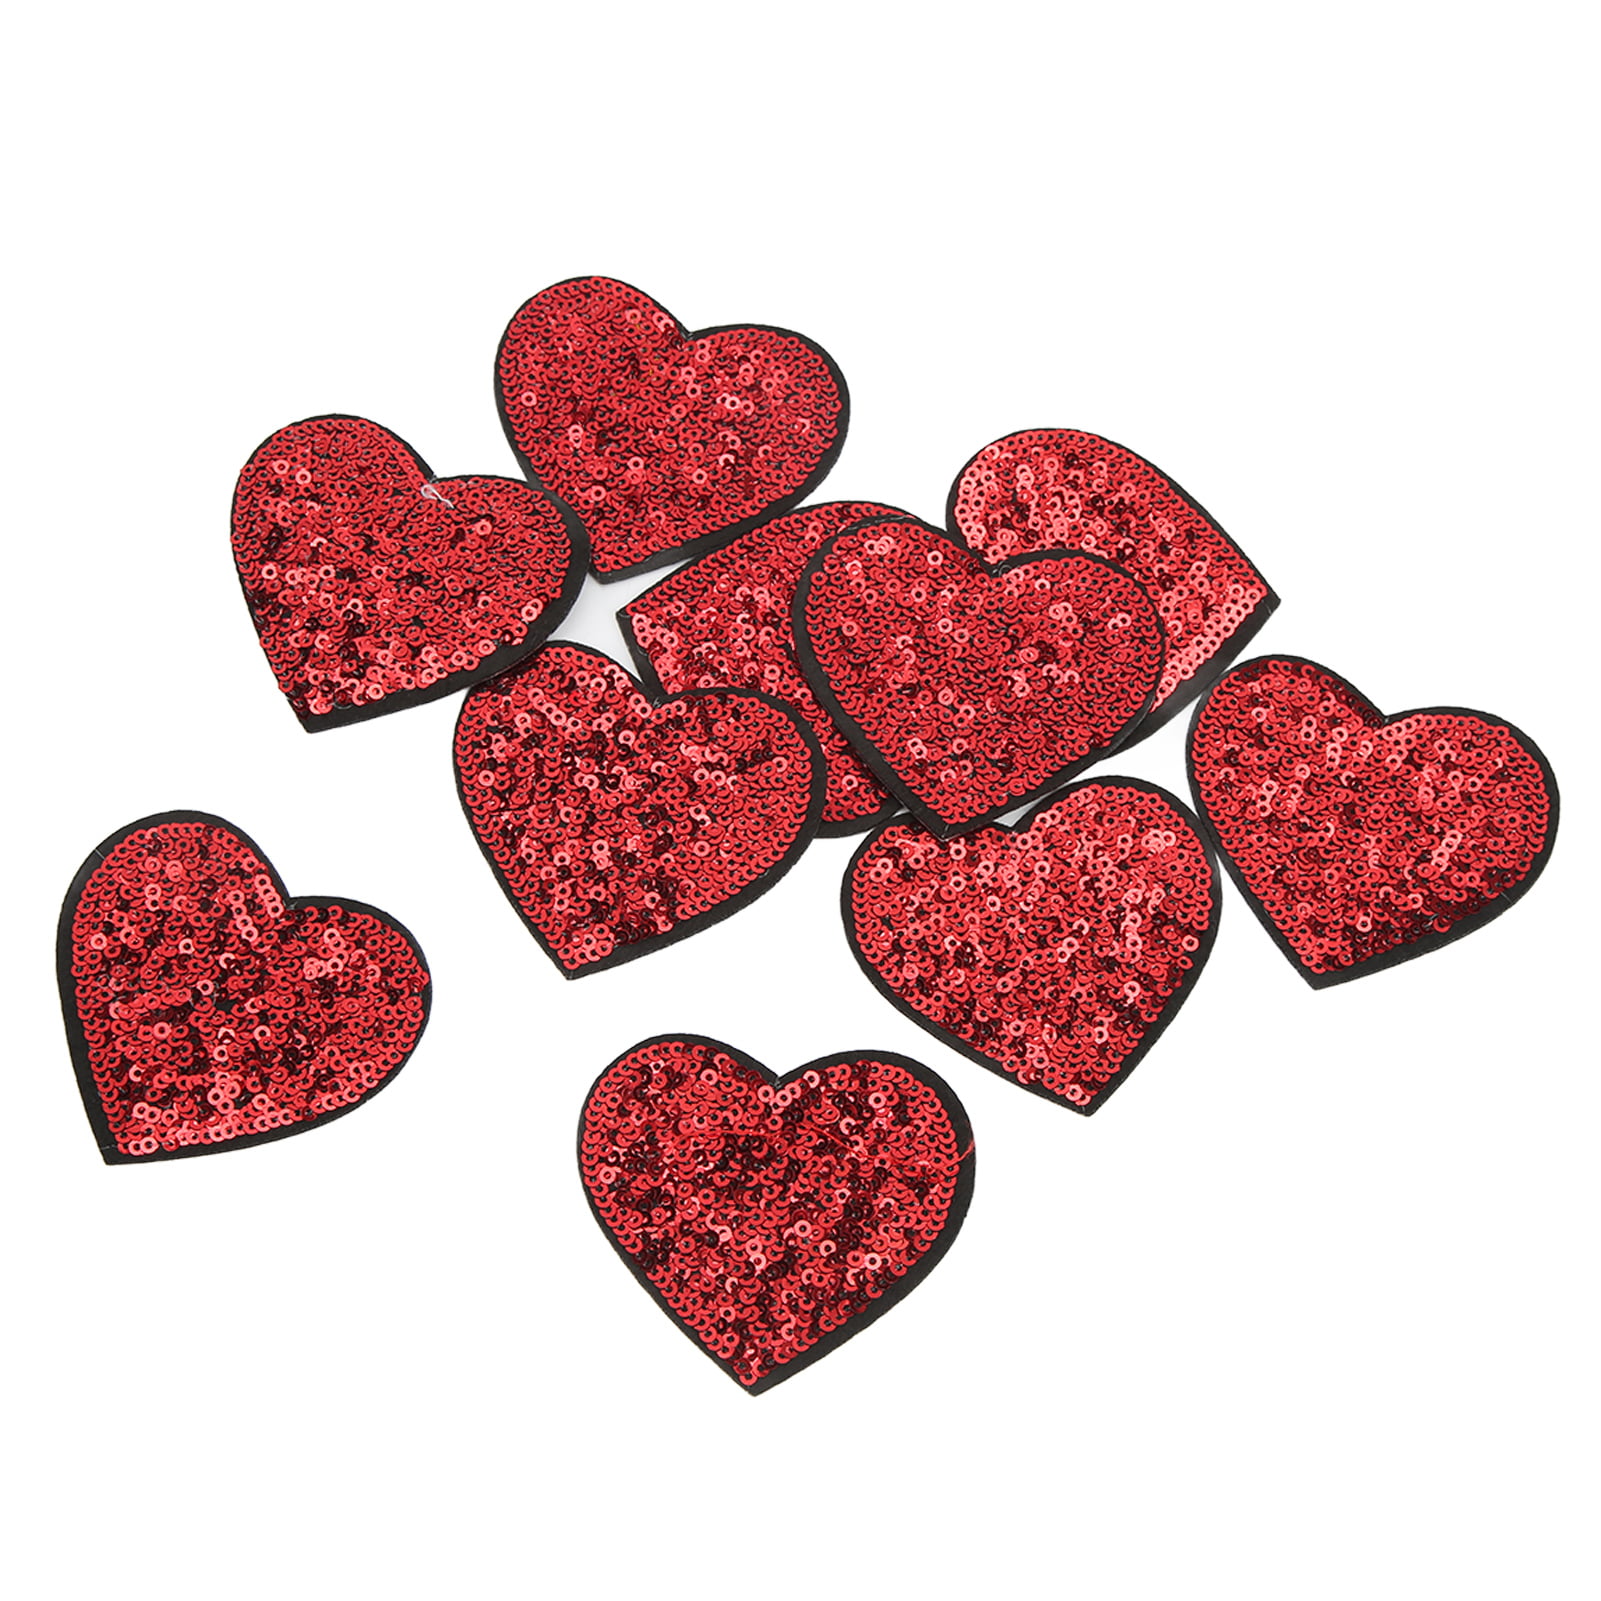 10PCS Heart Love Small Patches Embroidered Sew On Iron On Badge Fabric Applique 